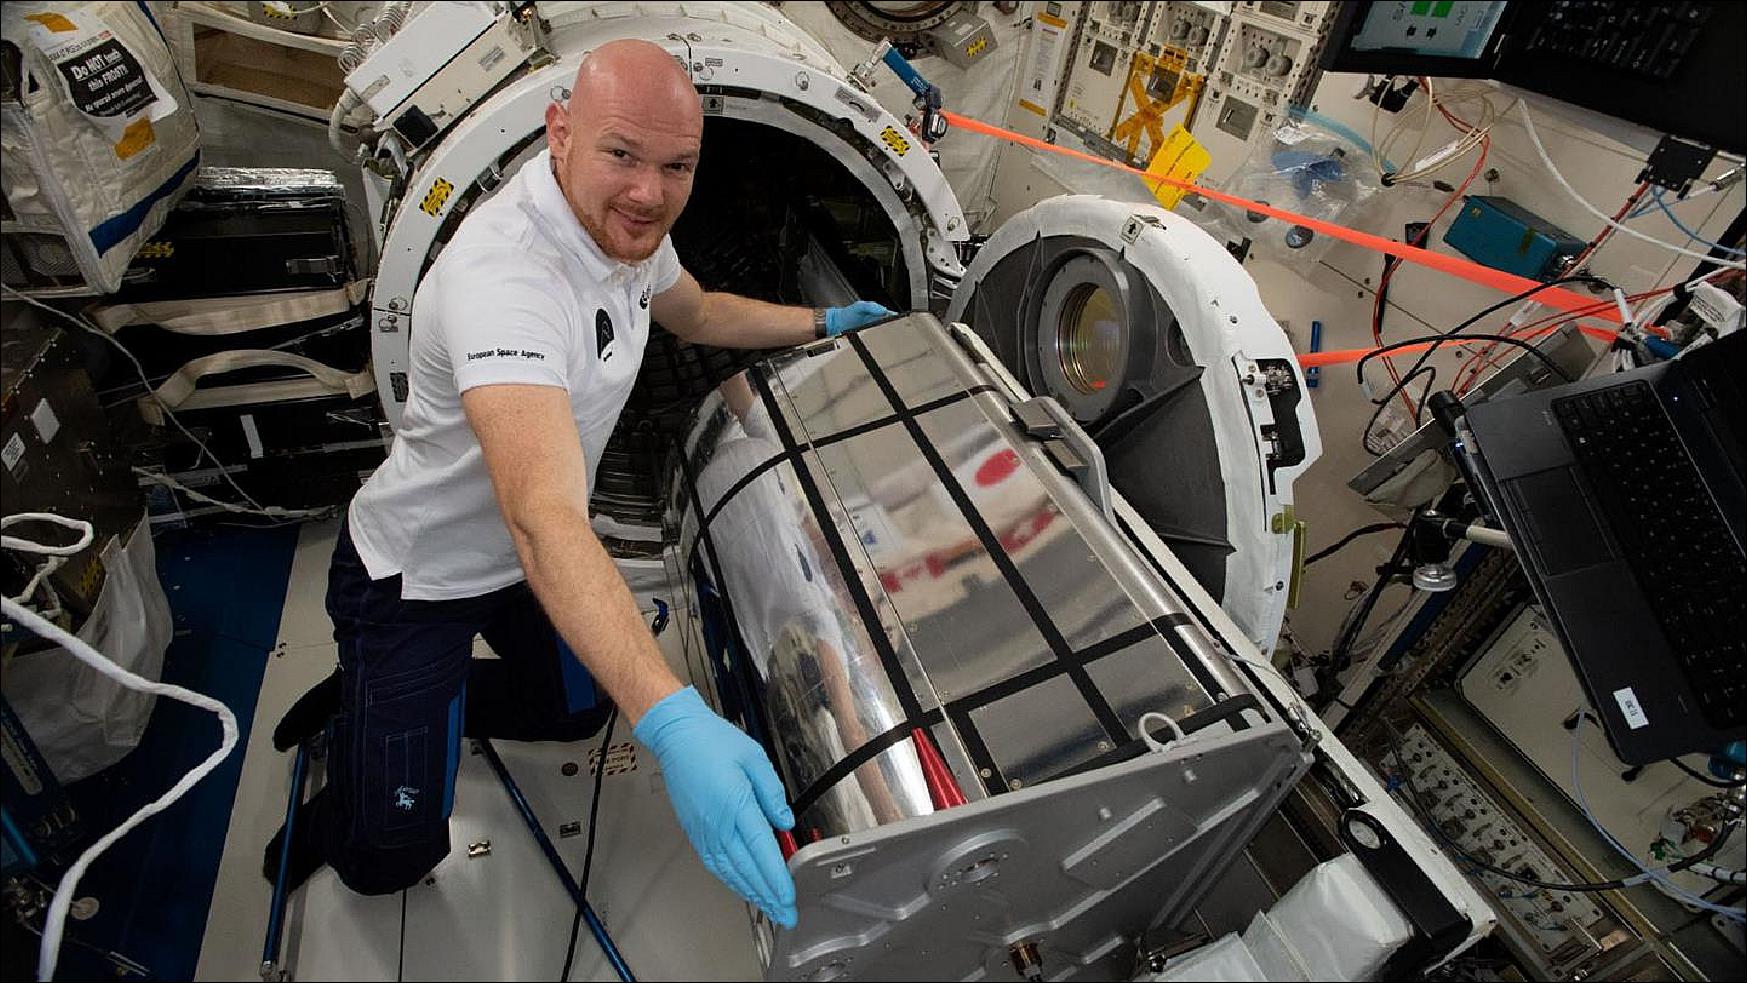 Figure 24: Preparations for the installation of DESIS by ESA astronaut Alexander Gerst (image credit: DLR, NASA)